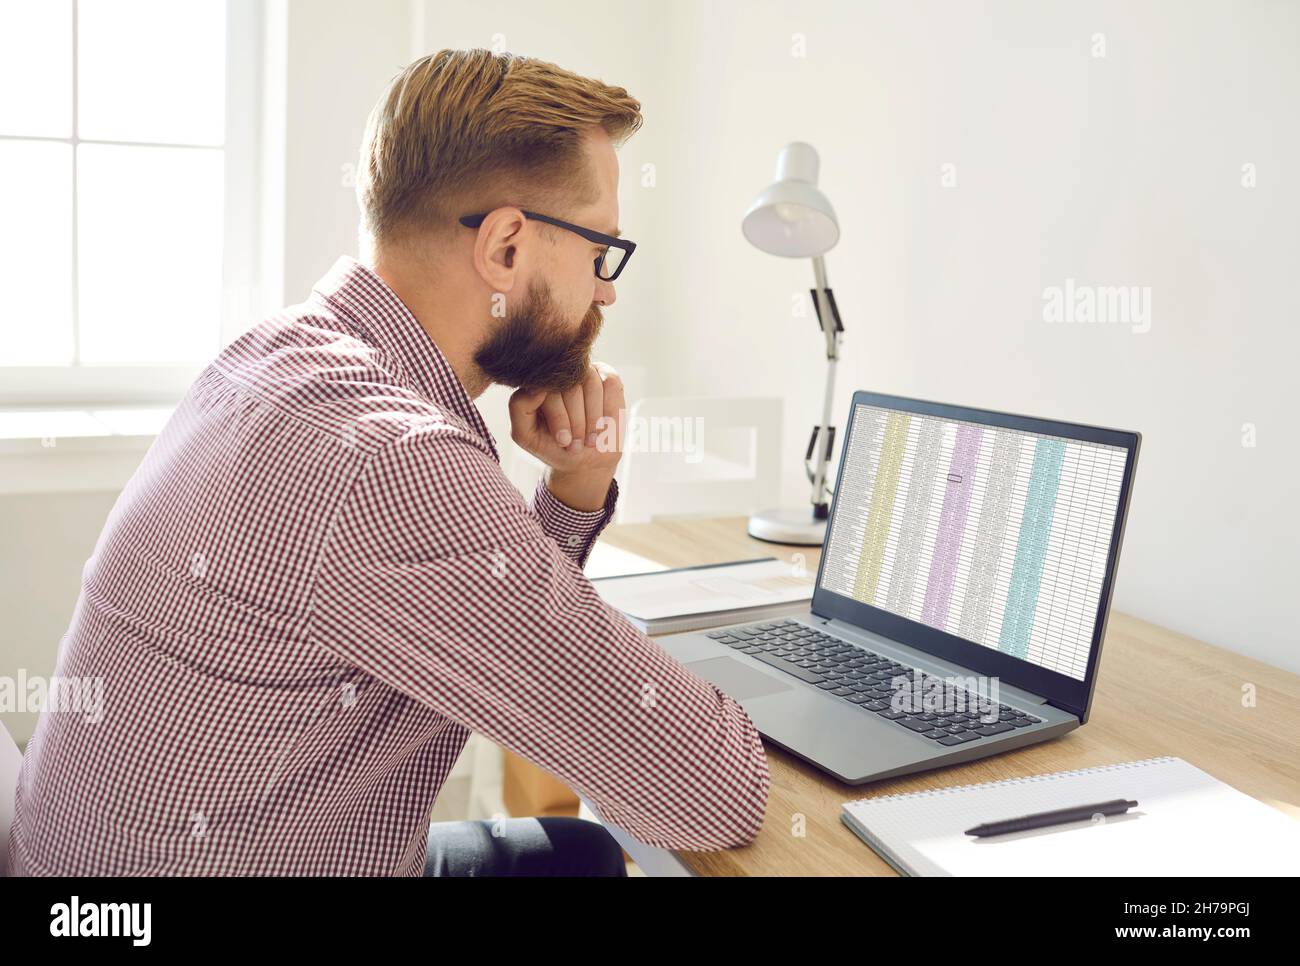 Serious financial accountant looking at spreadsheet on laptop screen and thinking Stock Photo